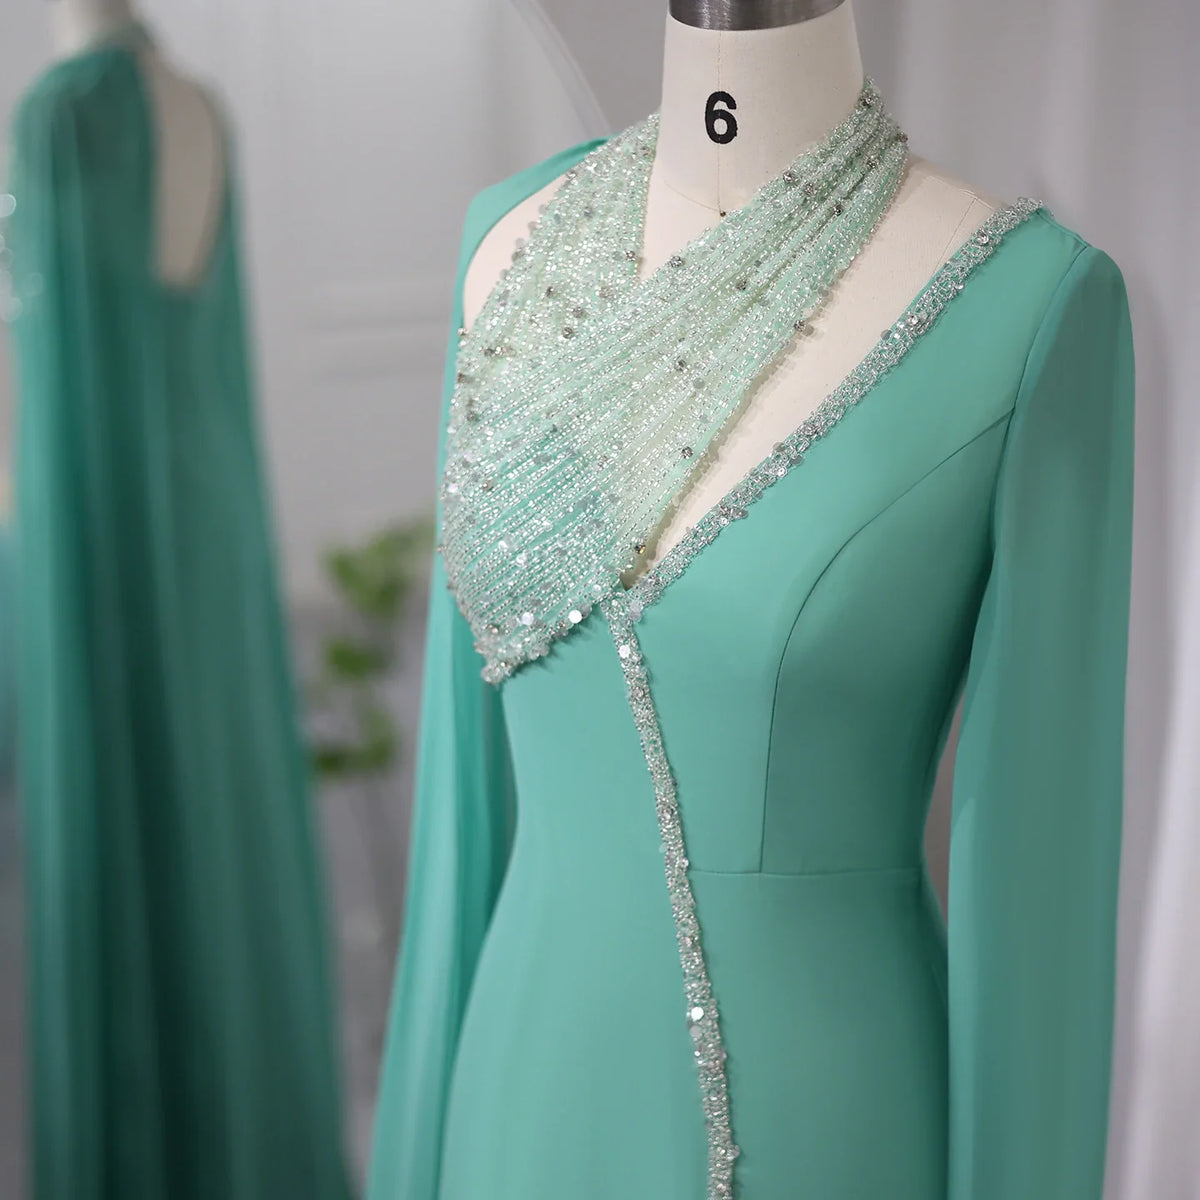 Dreamy Vow Turquoise Green Chiffon Dubai Evening Dress with Cape Sleeves Luxury Beaded Arabic Women Wedding Party Gowns 474